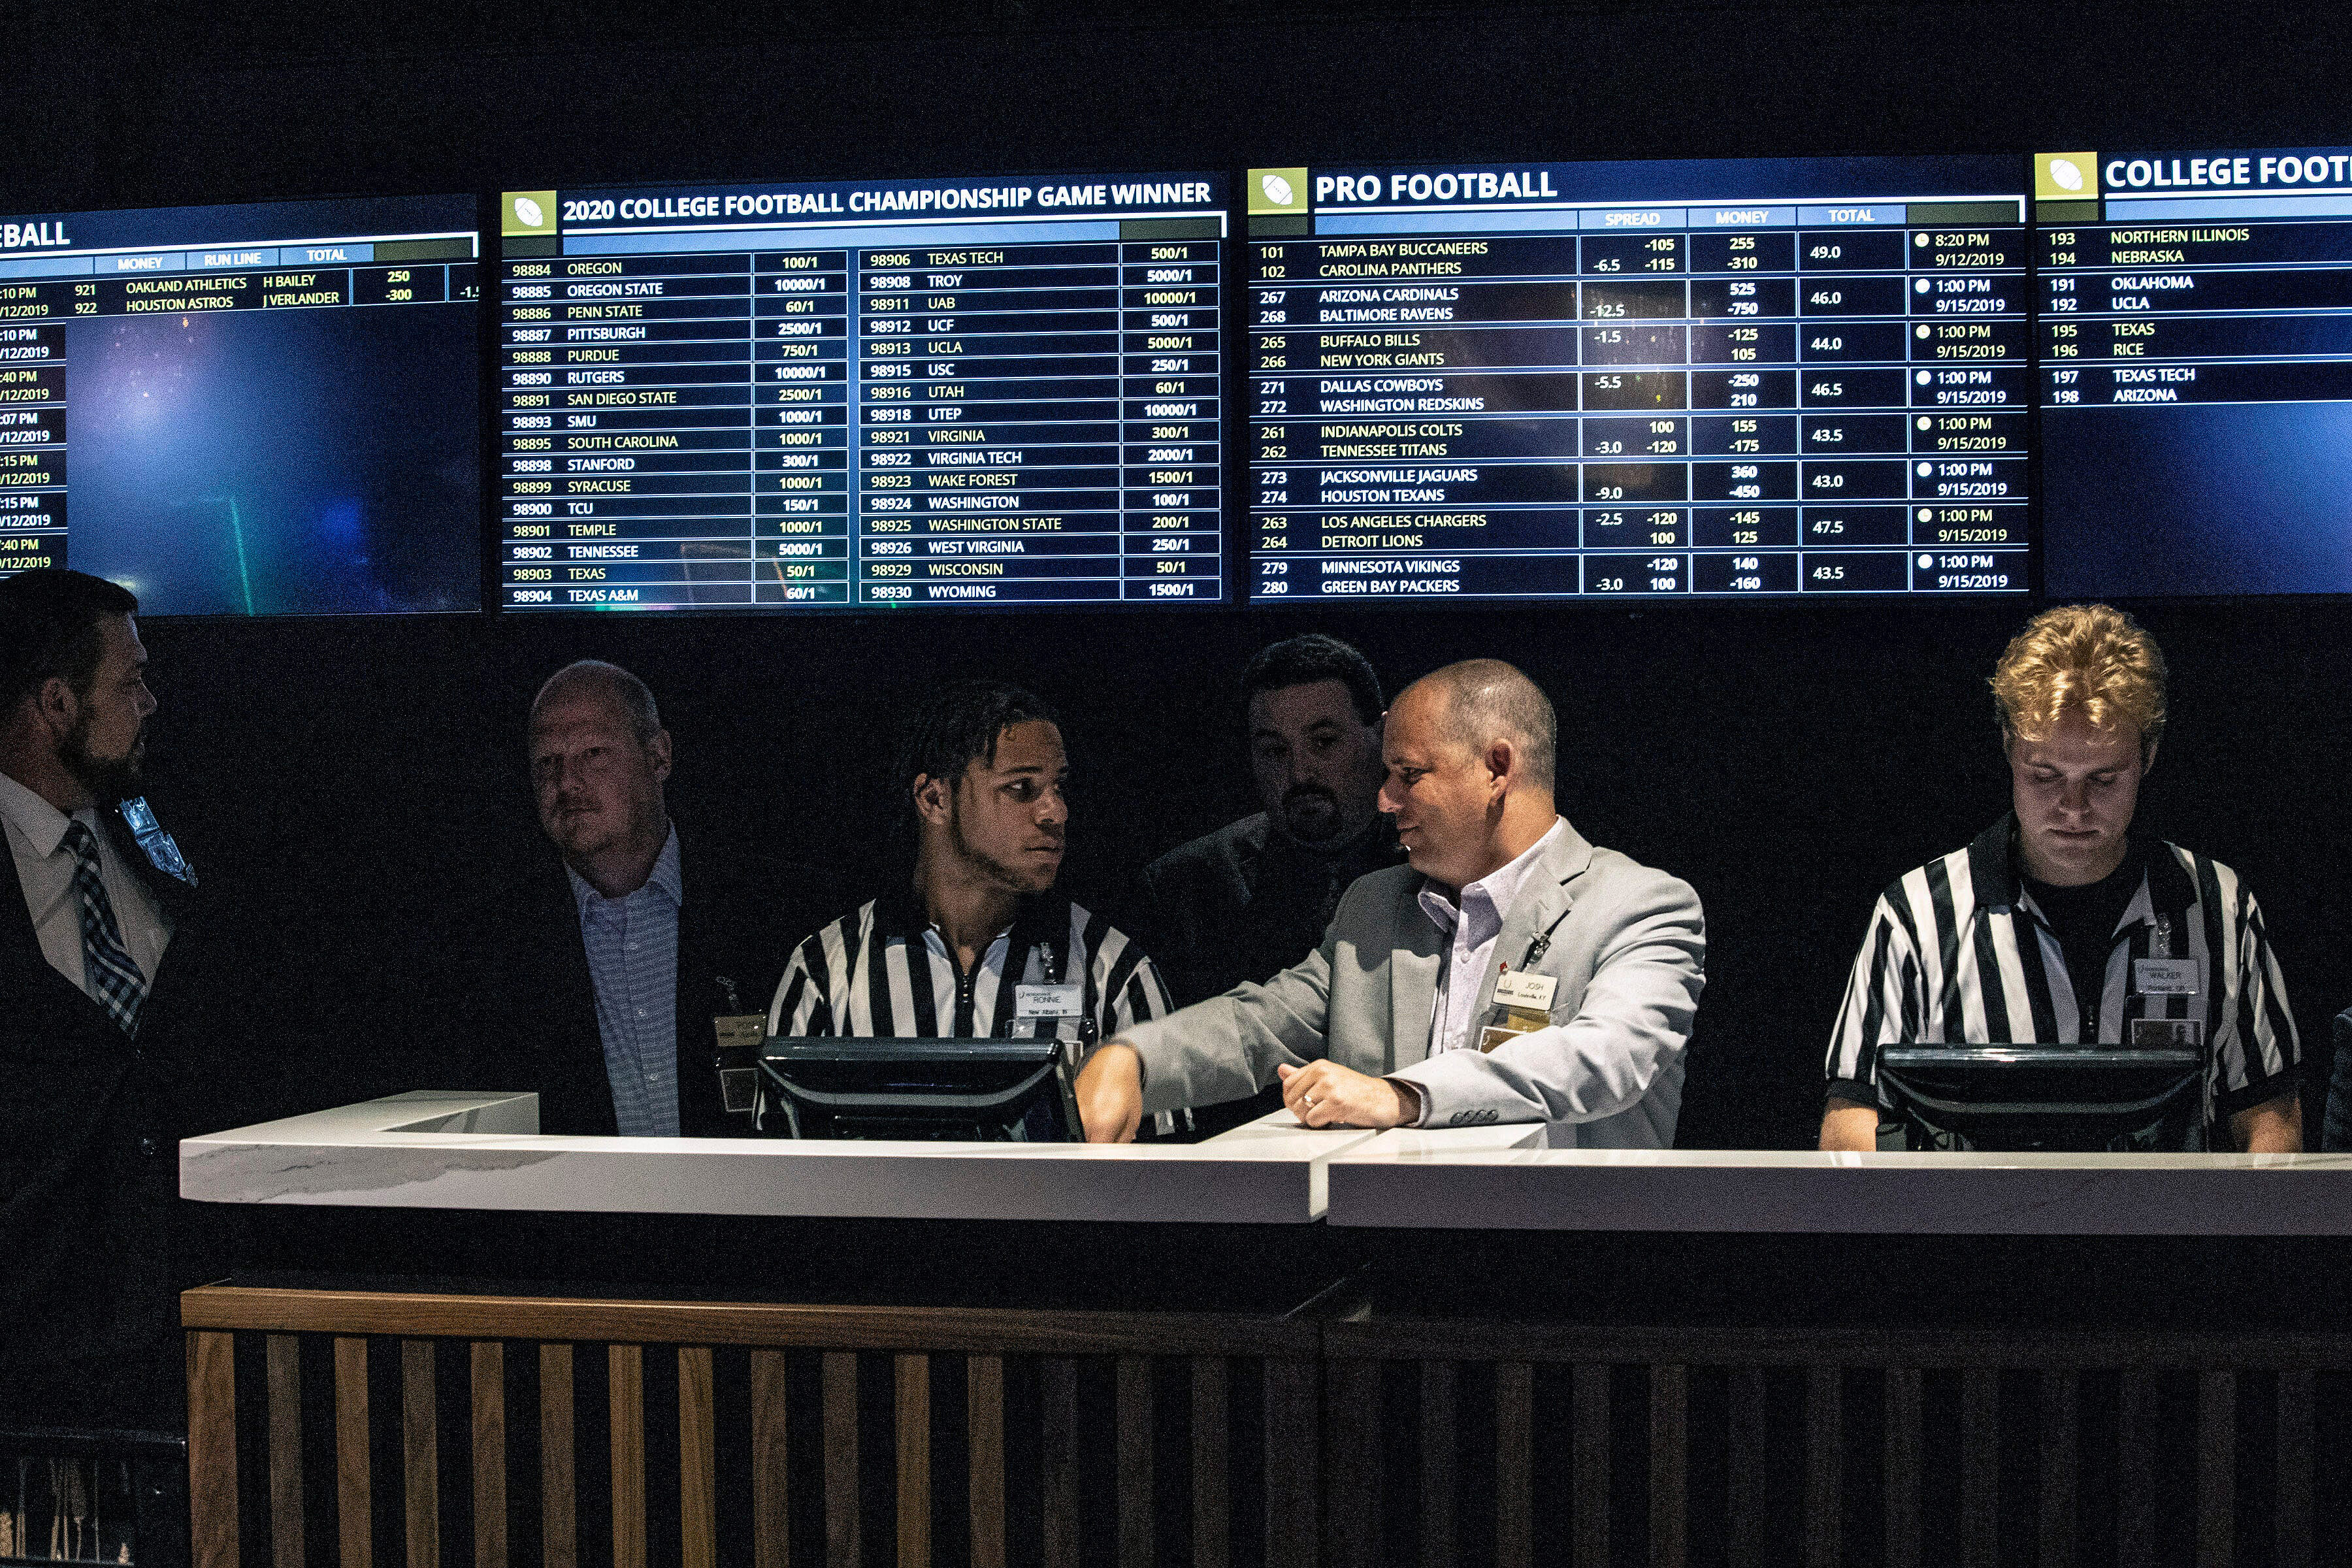 How To Bet - New Jersey Sports Betting Handle Falls Further in July